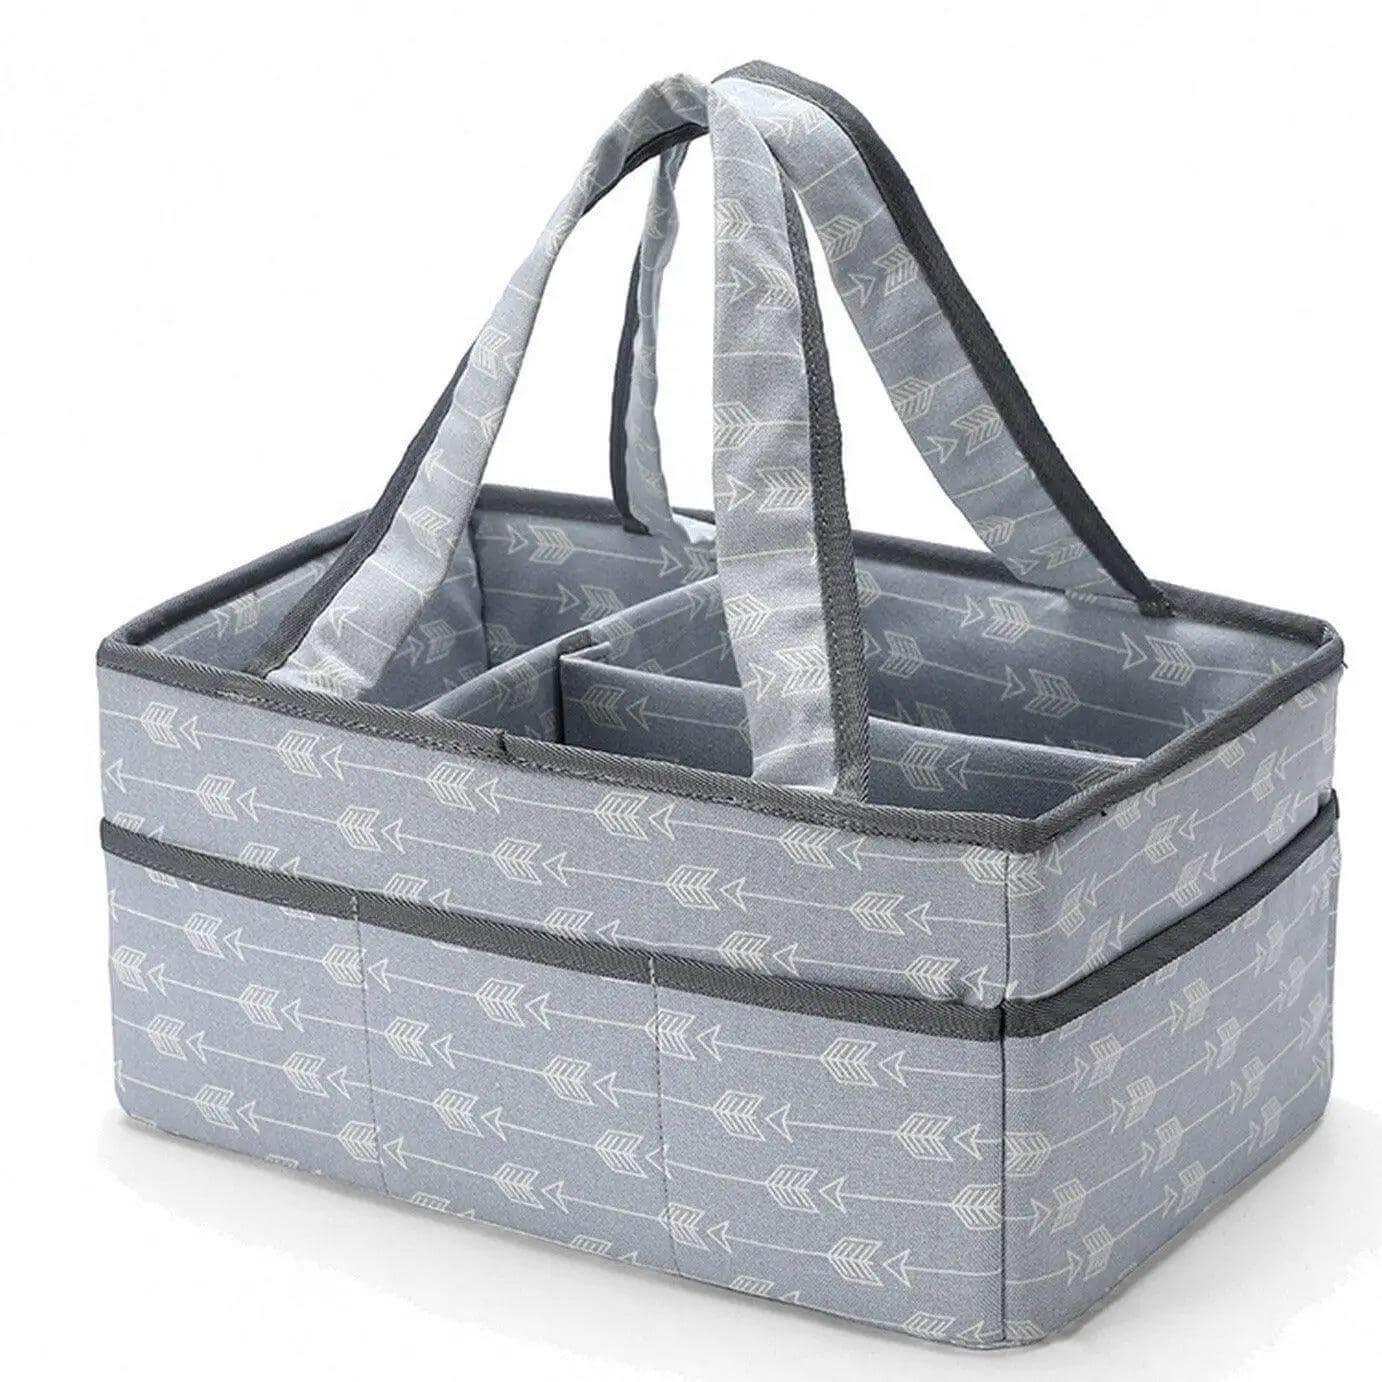 Kiddale Baby Nappy & Diaper Caddy Hand Bag for Mothers